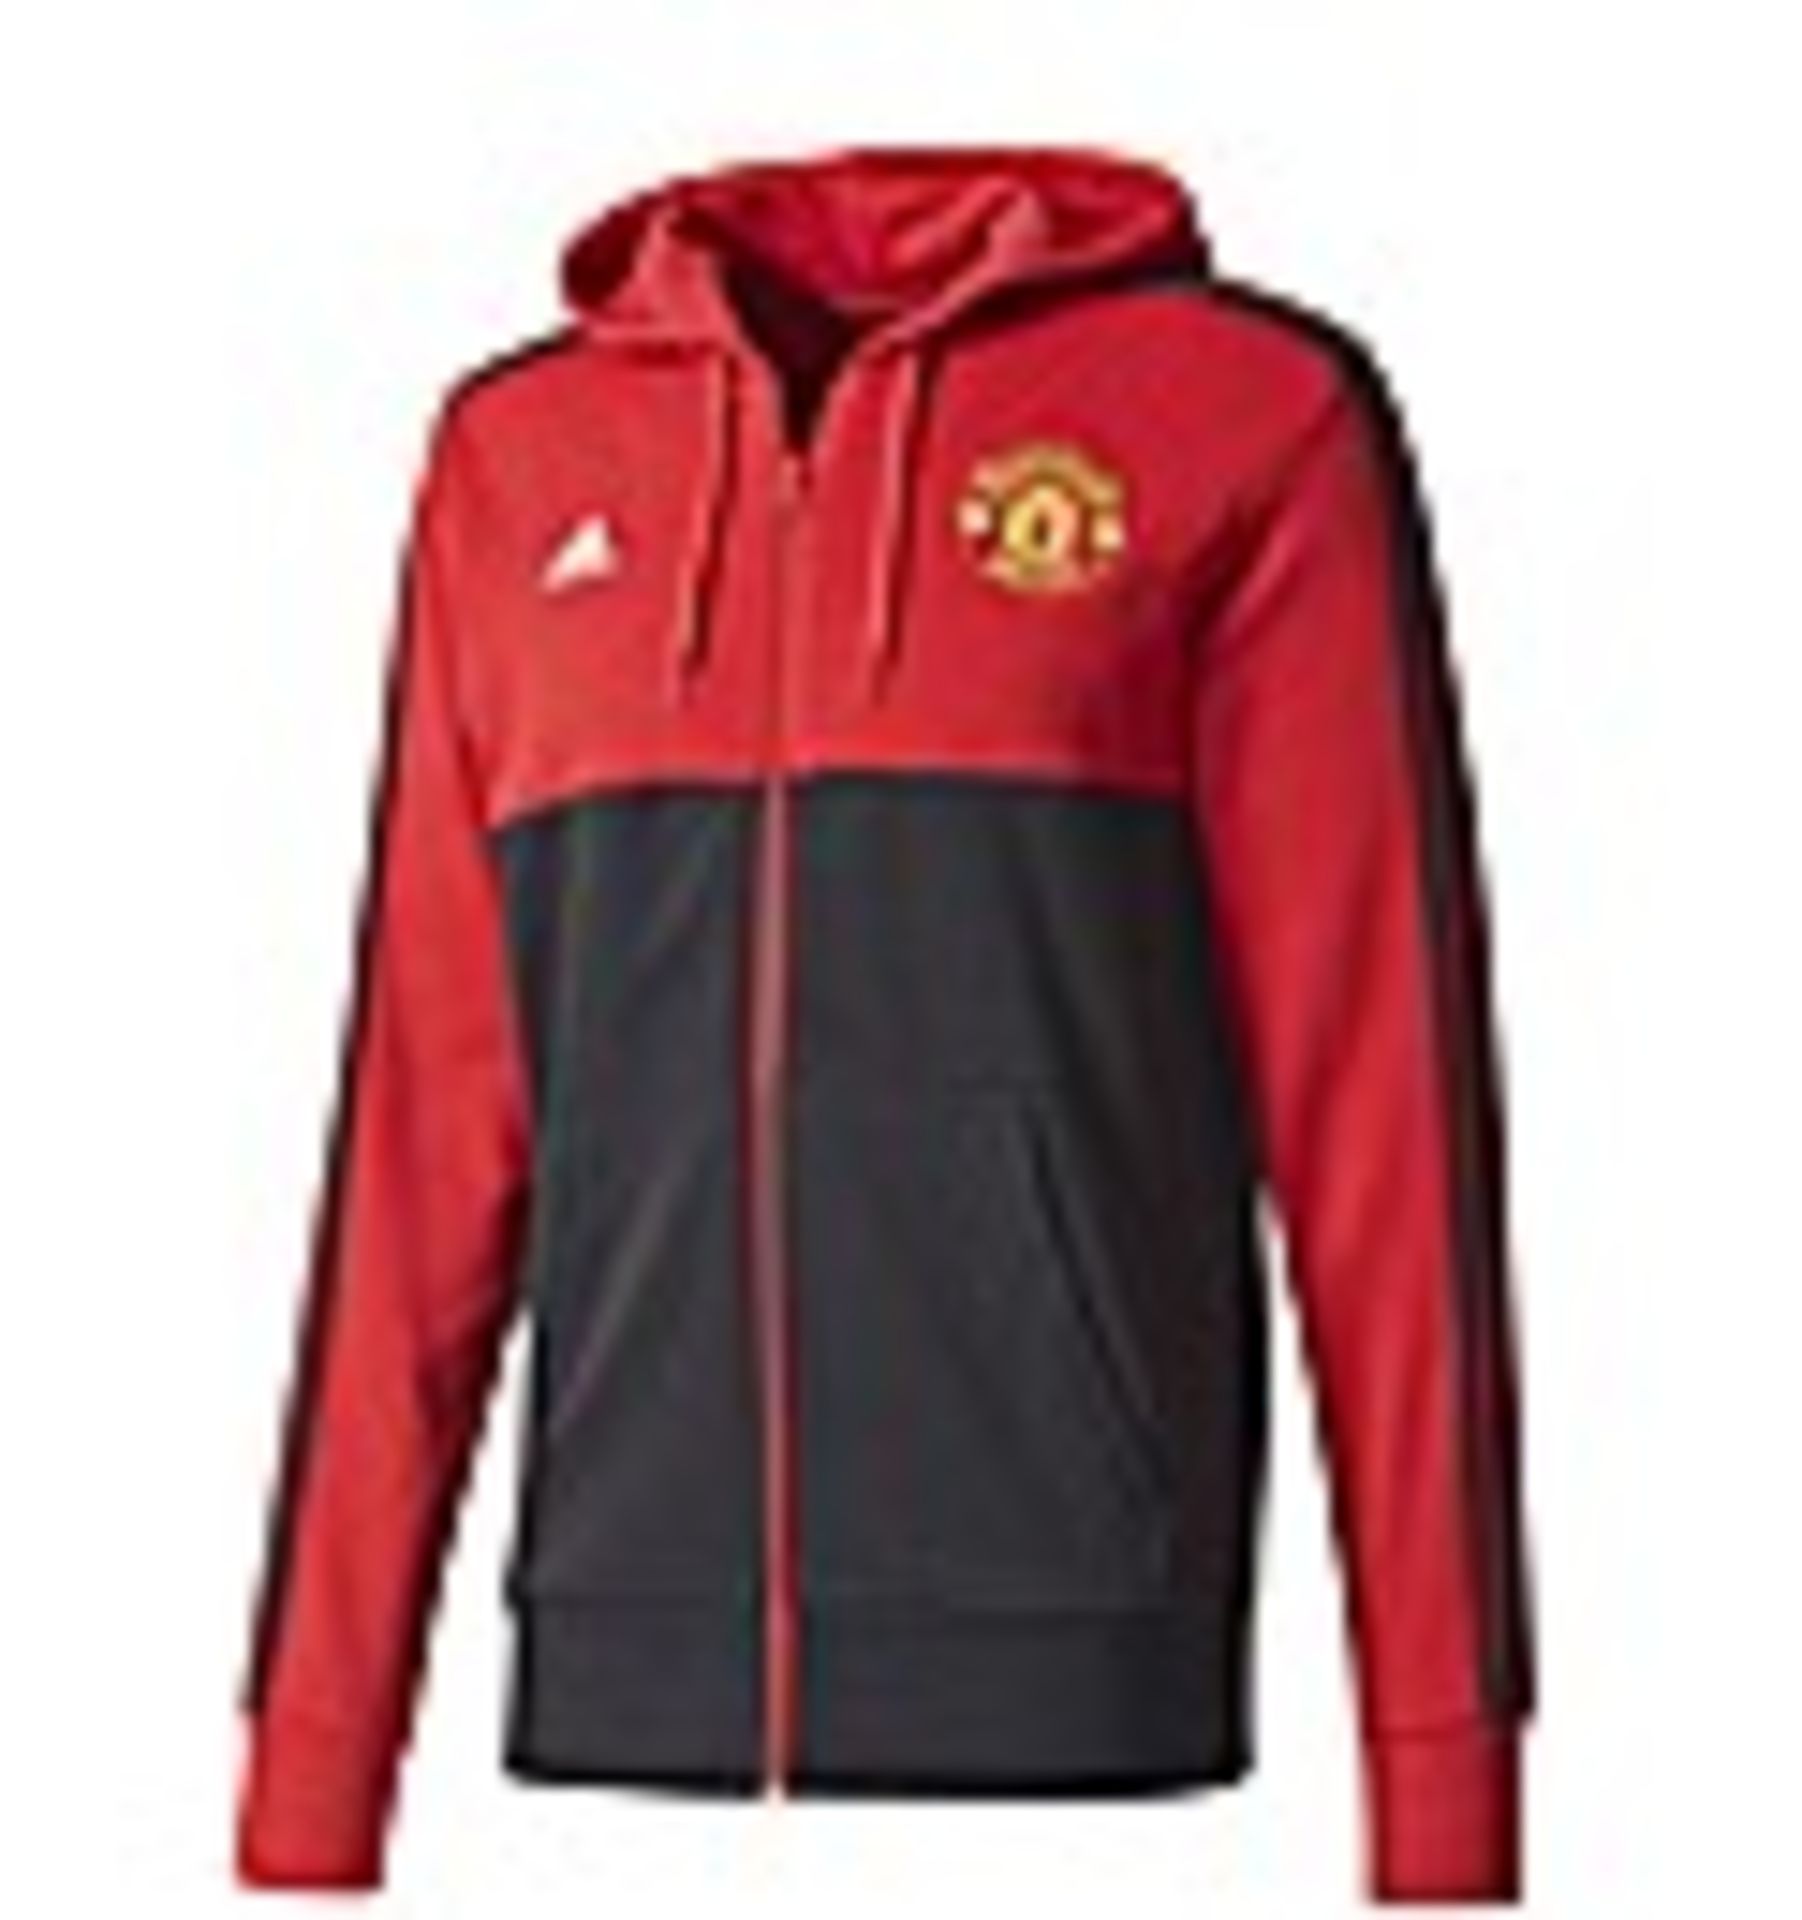 BRAND NEW MUFC 3 STRIPE HOODY SIZE 3XL RRP £55Condition ReportBRAND NEW